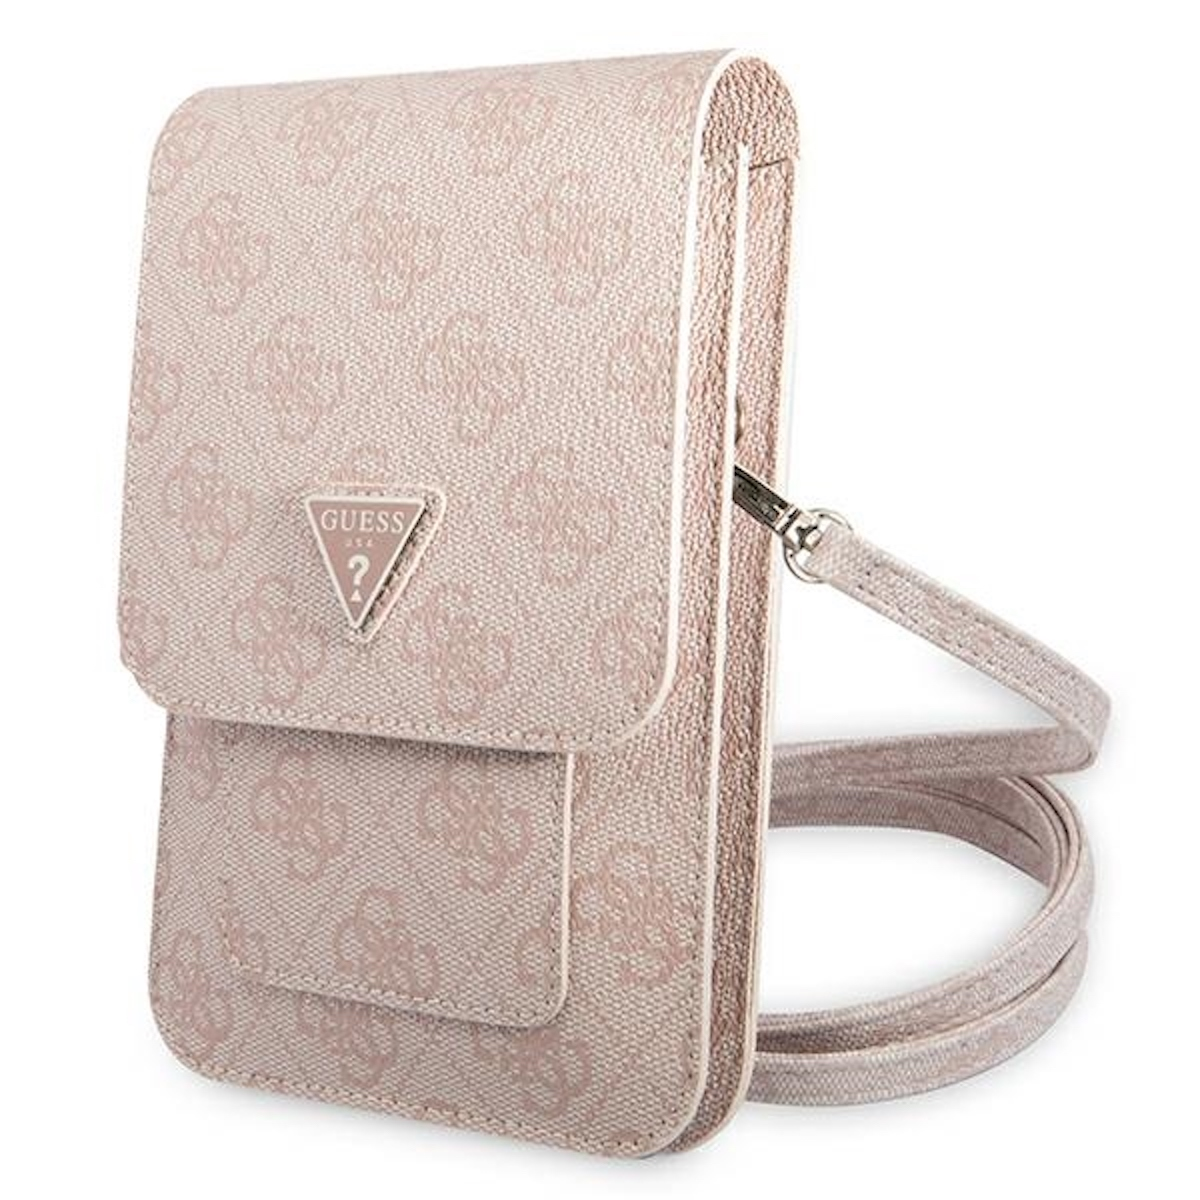 Universelle Full Cover, Triangle Torebka Tasche, Universell, Rosa GUESS Umhängetasche,